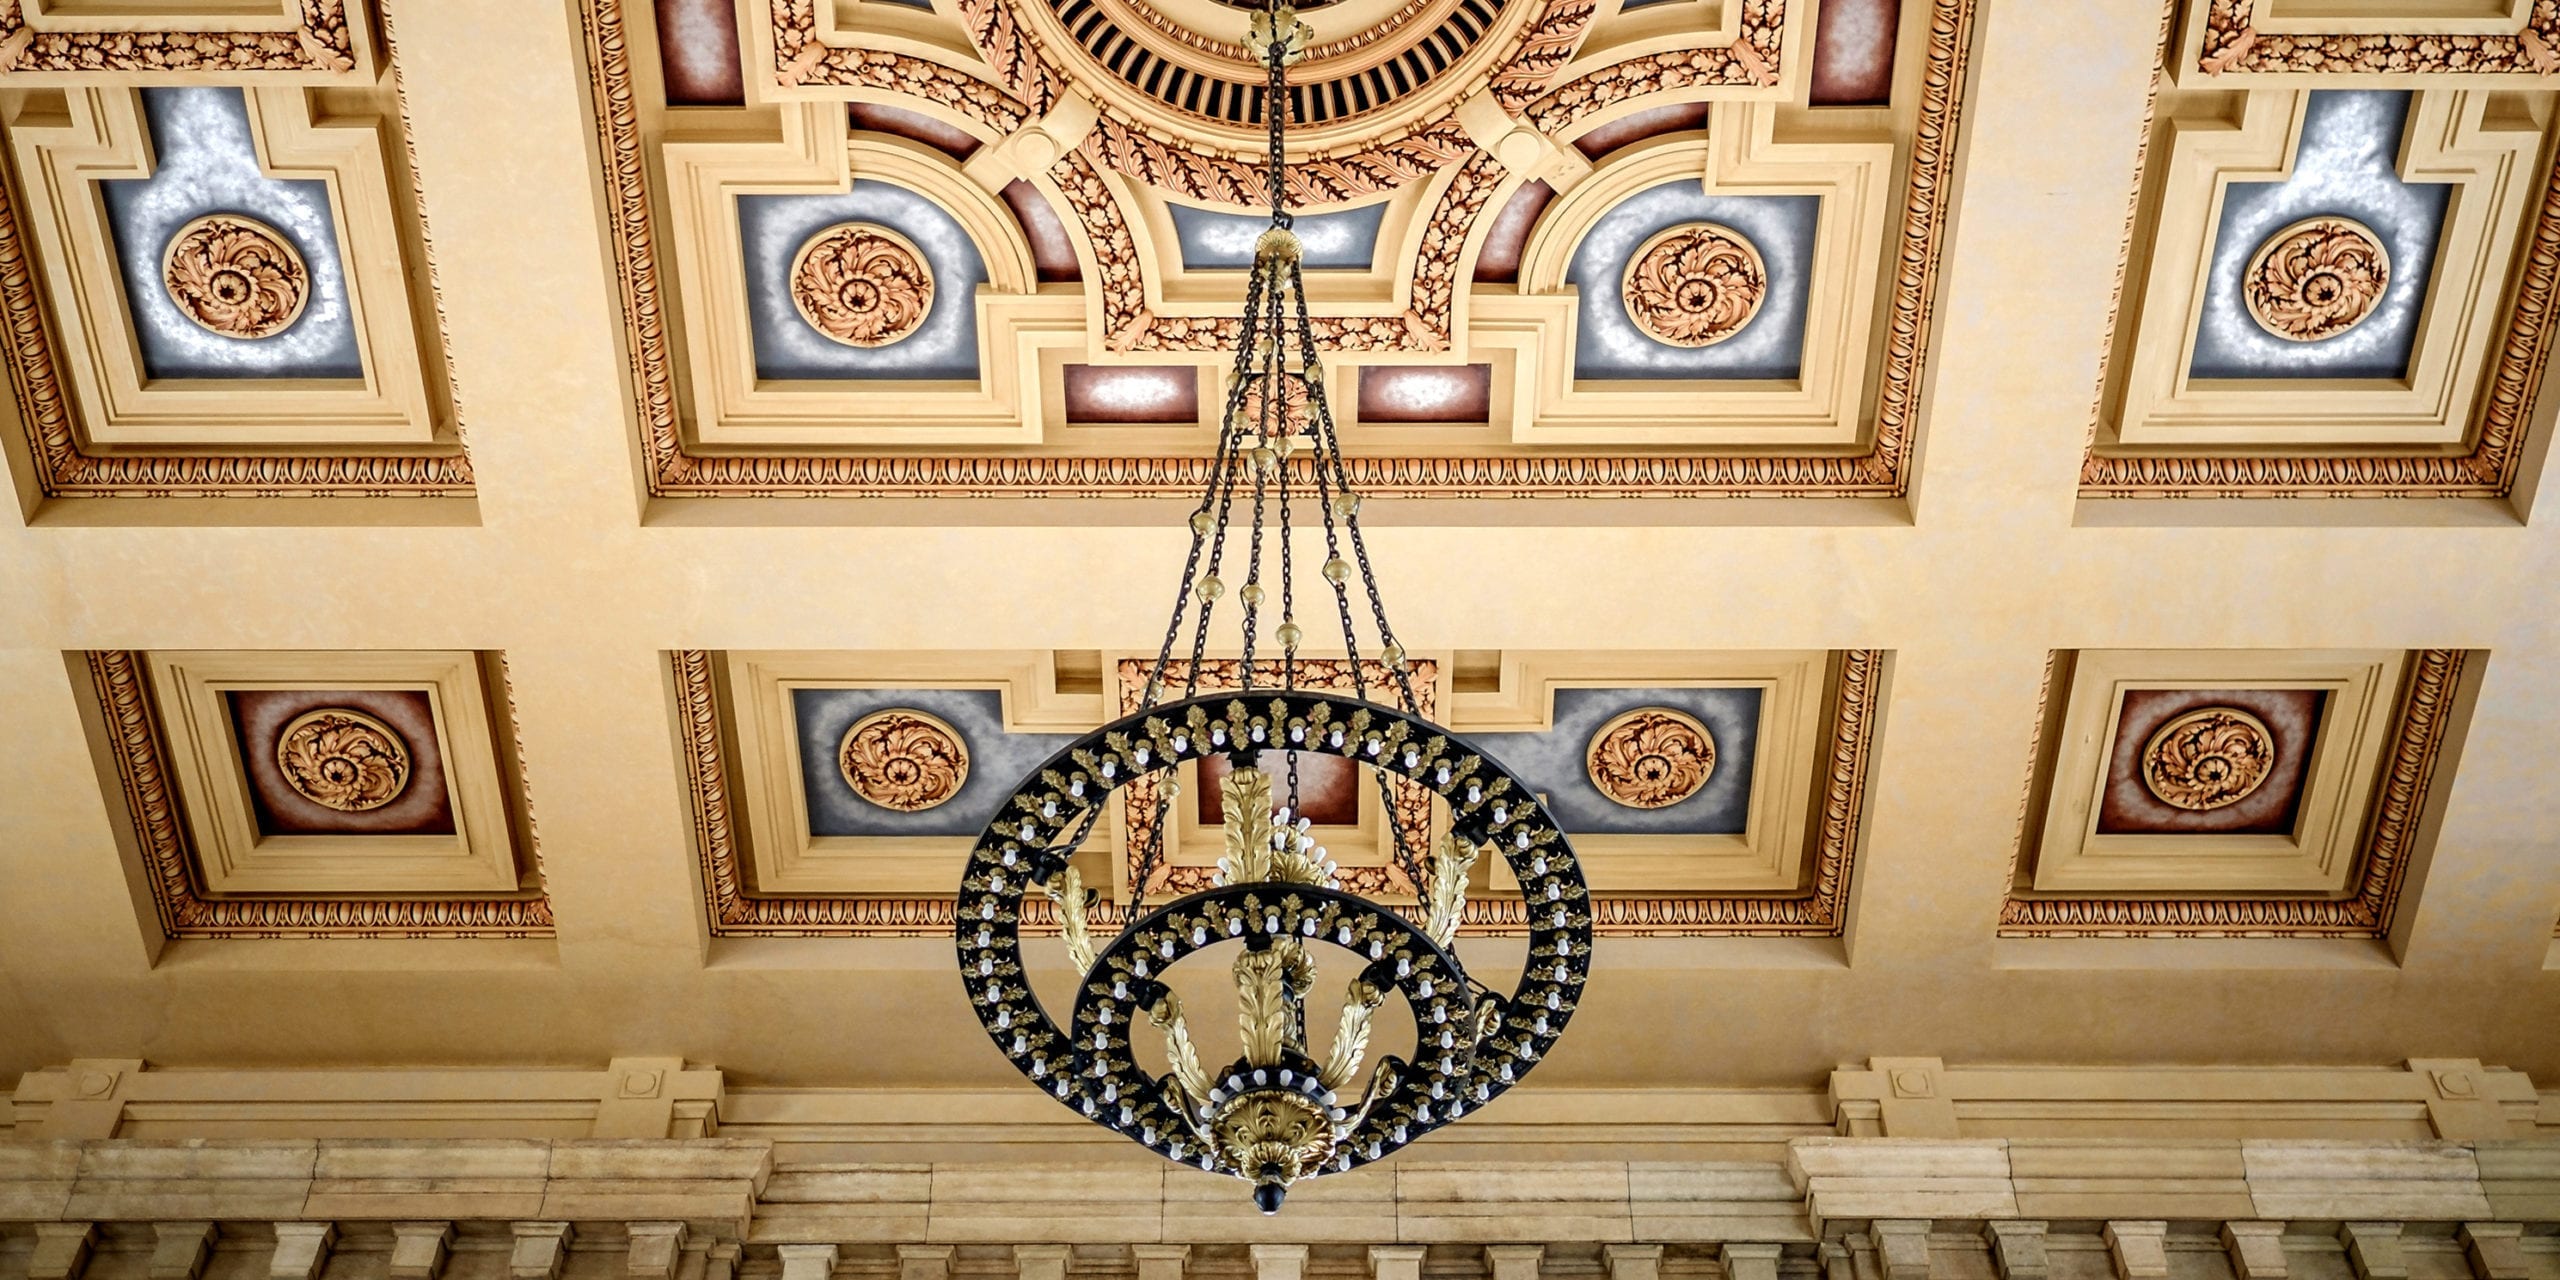 The ceiling of Kansas City's Union Station. Photo by Flickr user Luca Sartoni.